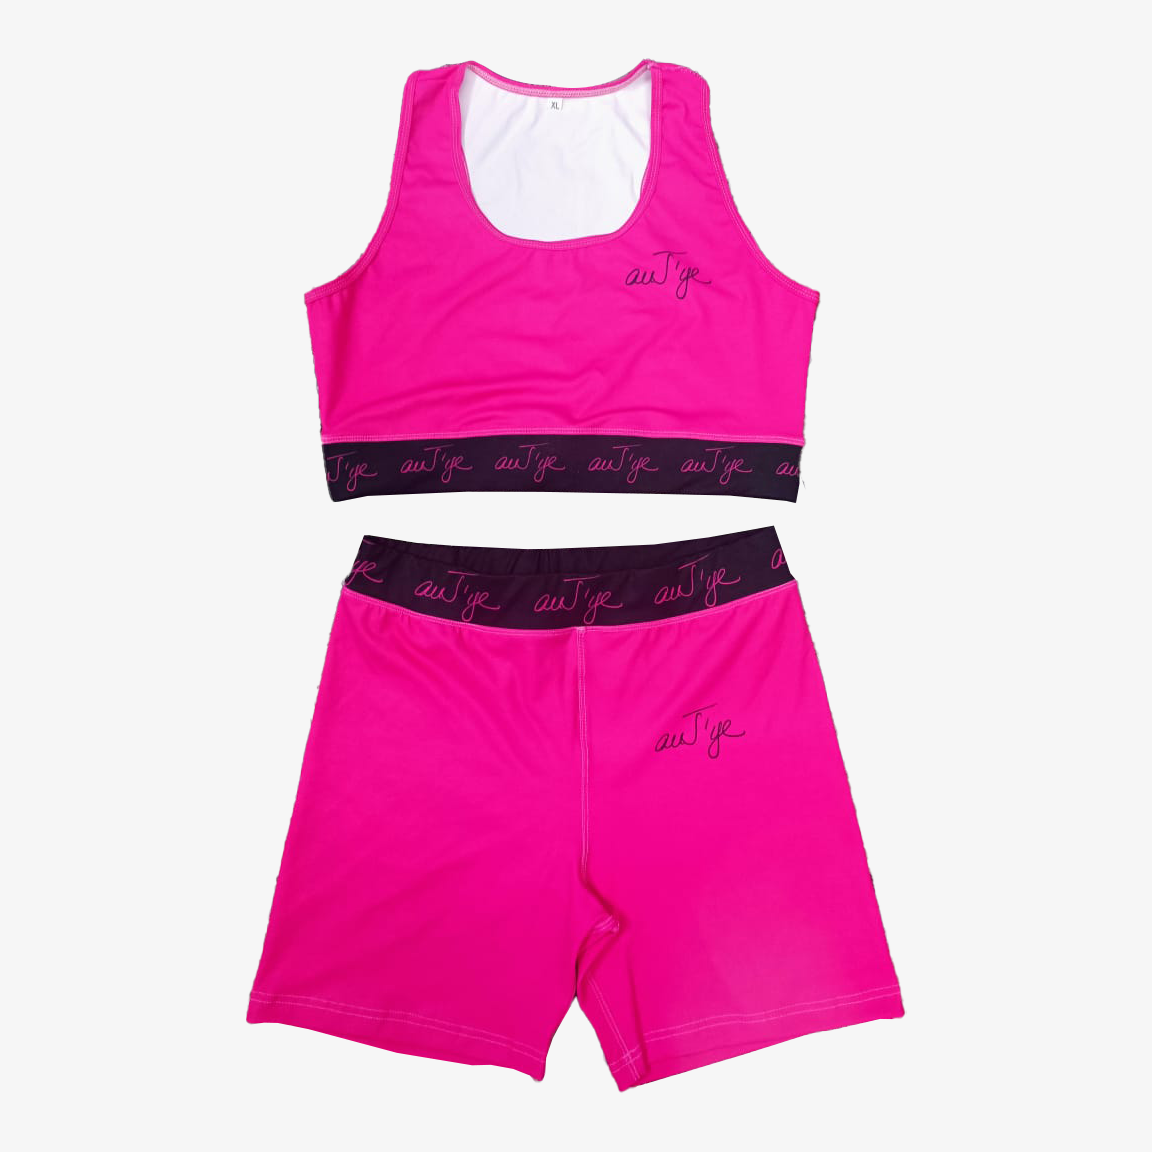 C.enter O.f A.ttention Pink and Black Two Piece Shorts and Sports Bra